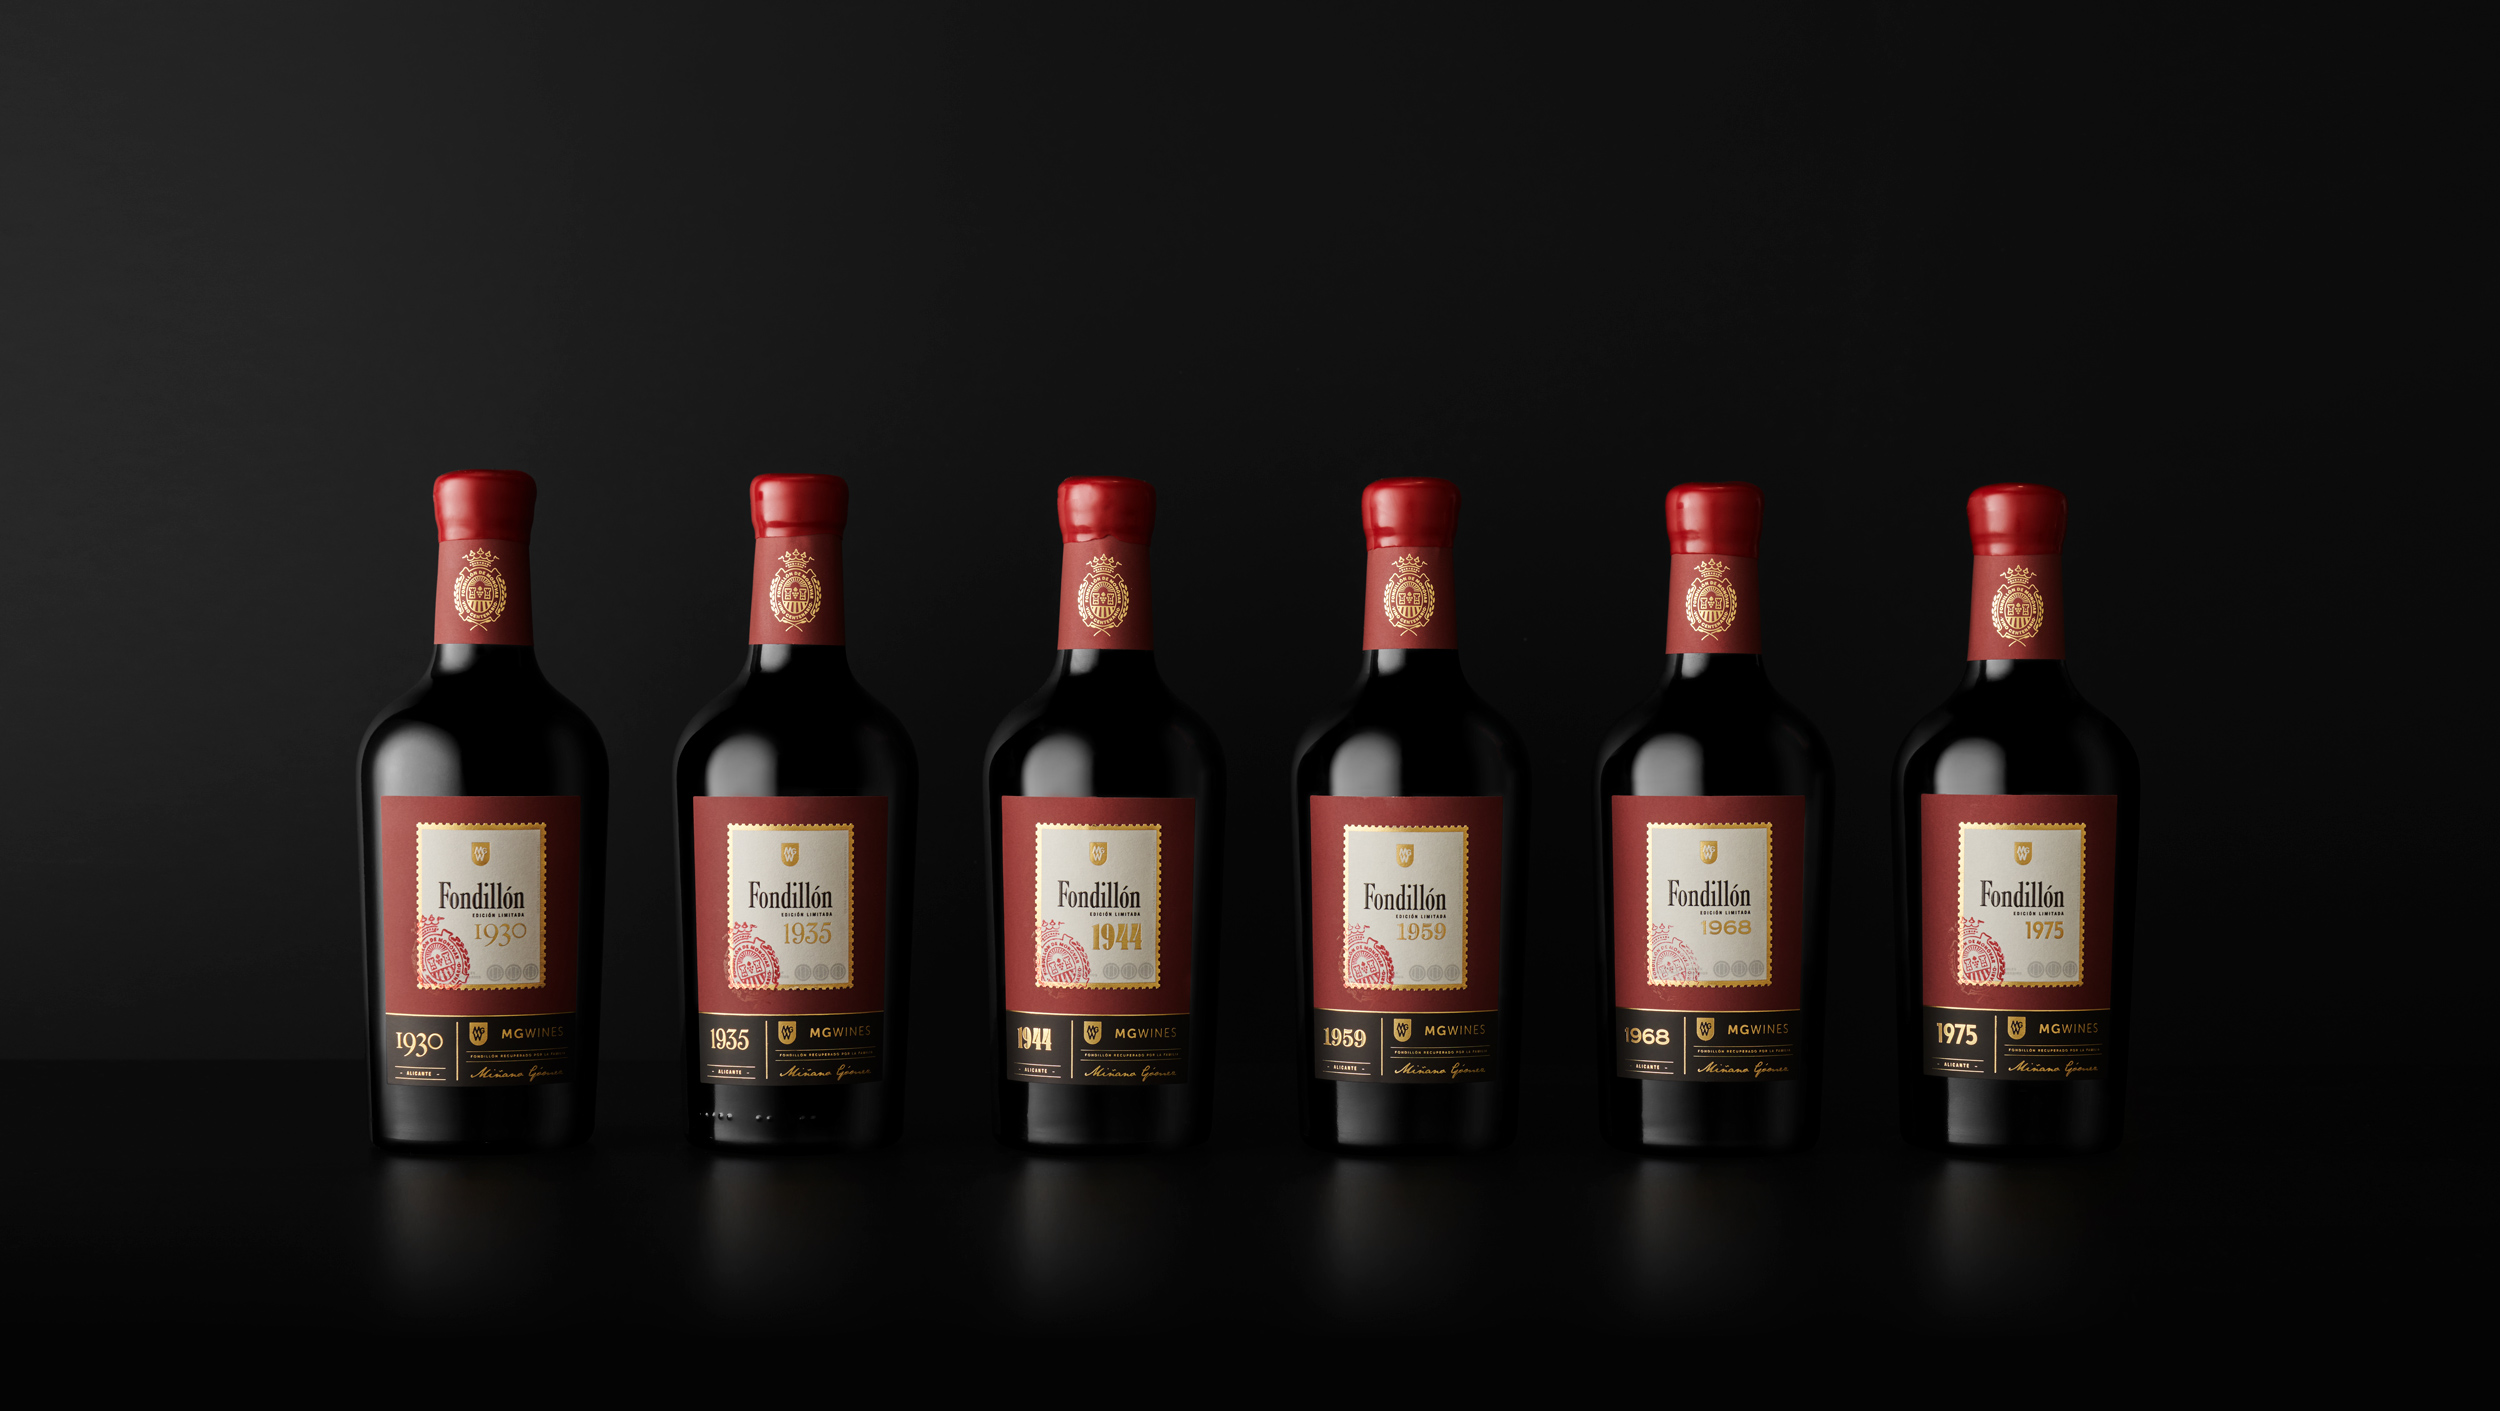 Fondillon 80 Wine Packaging Design by Maba